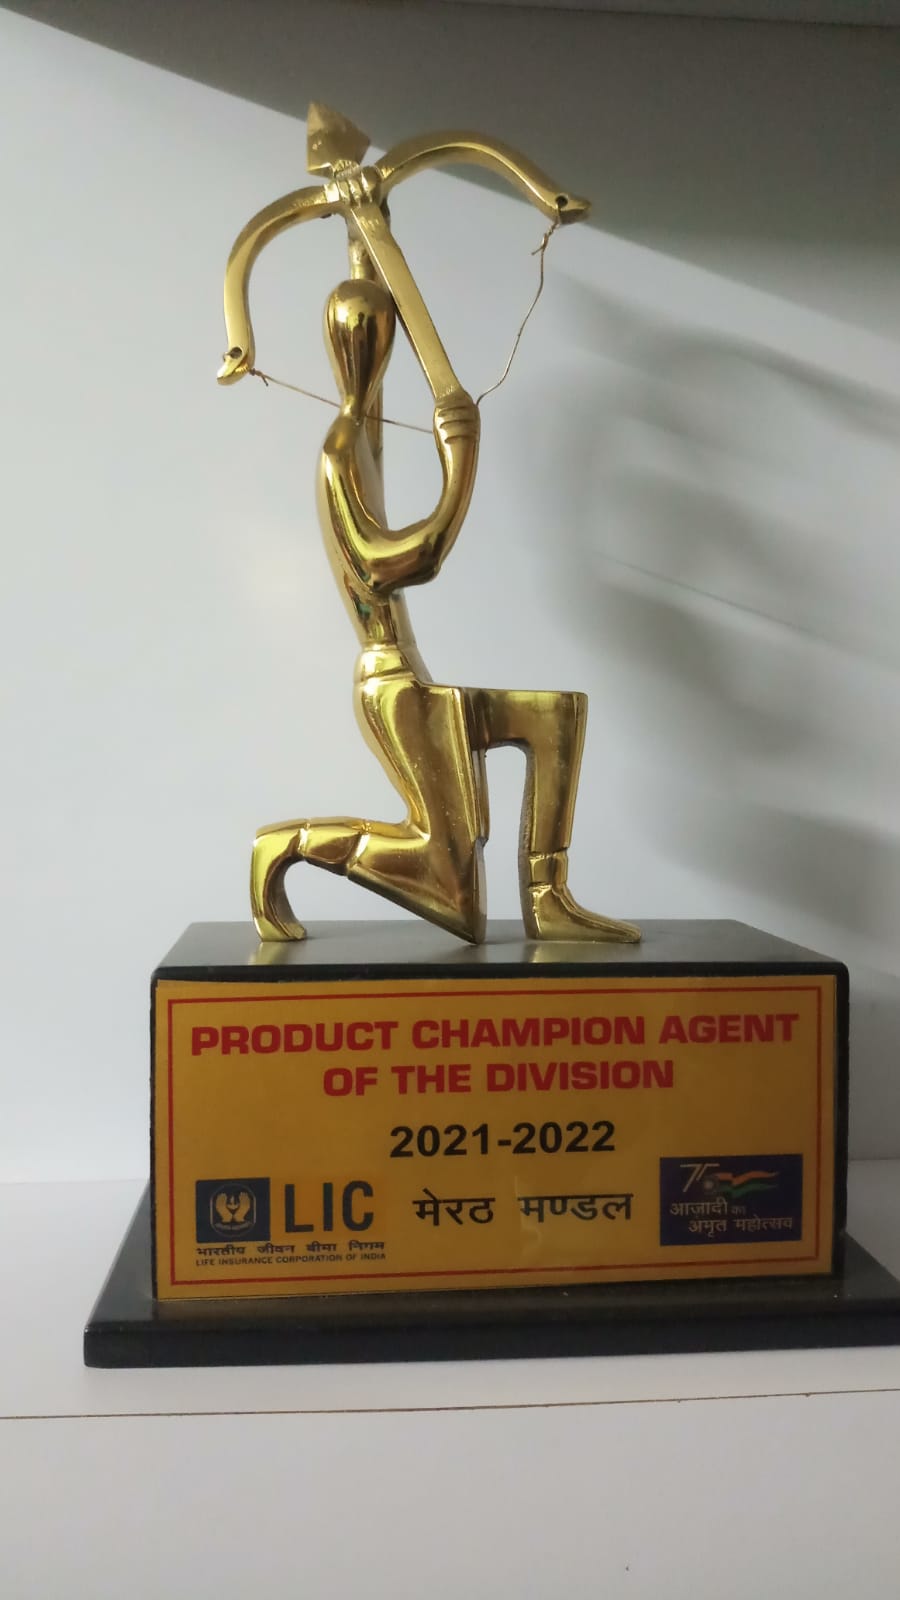 Product Champion Agent of the division 2021-22